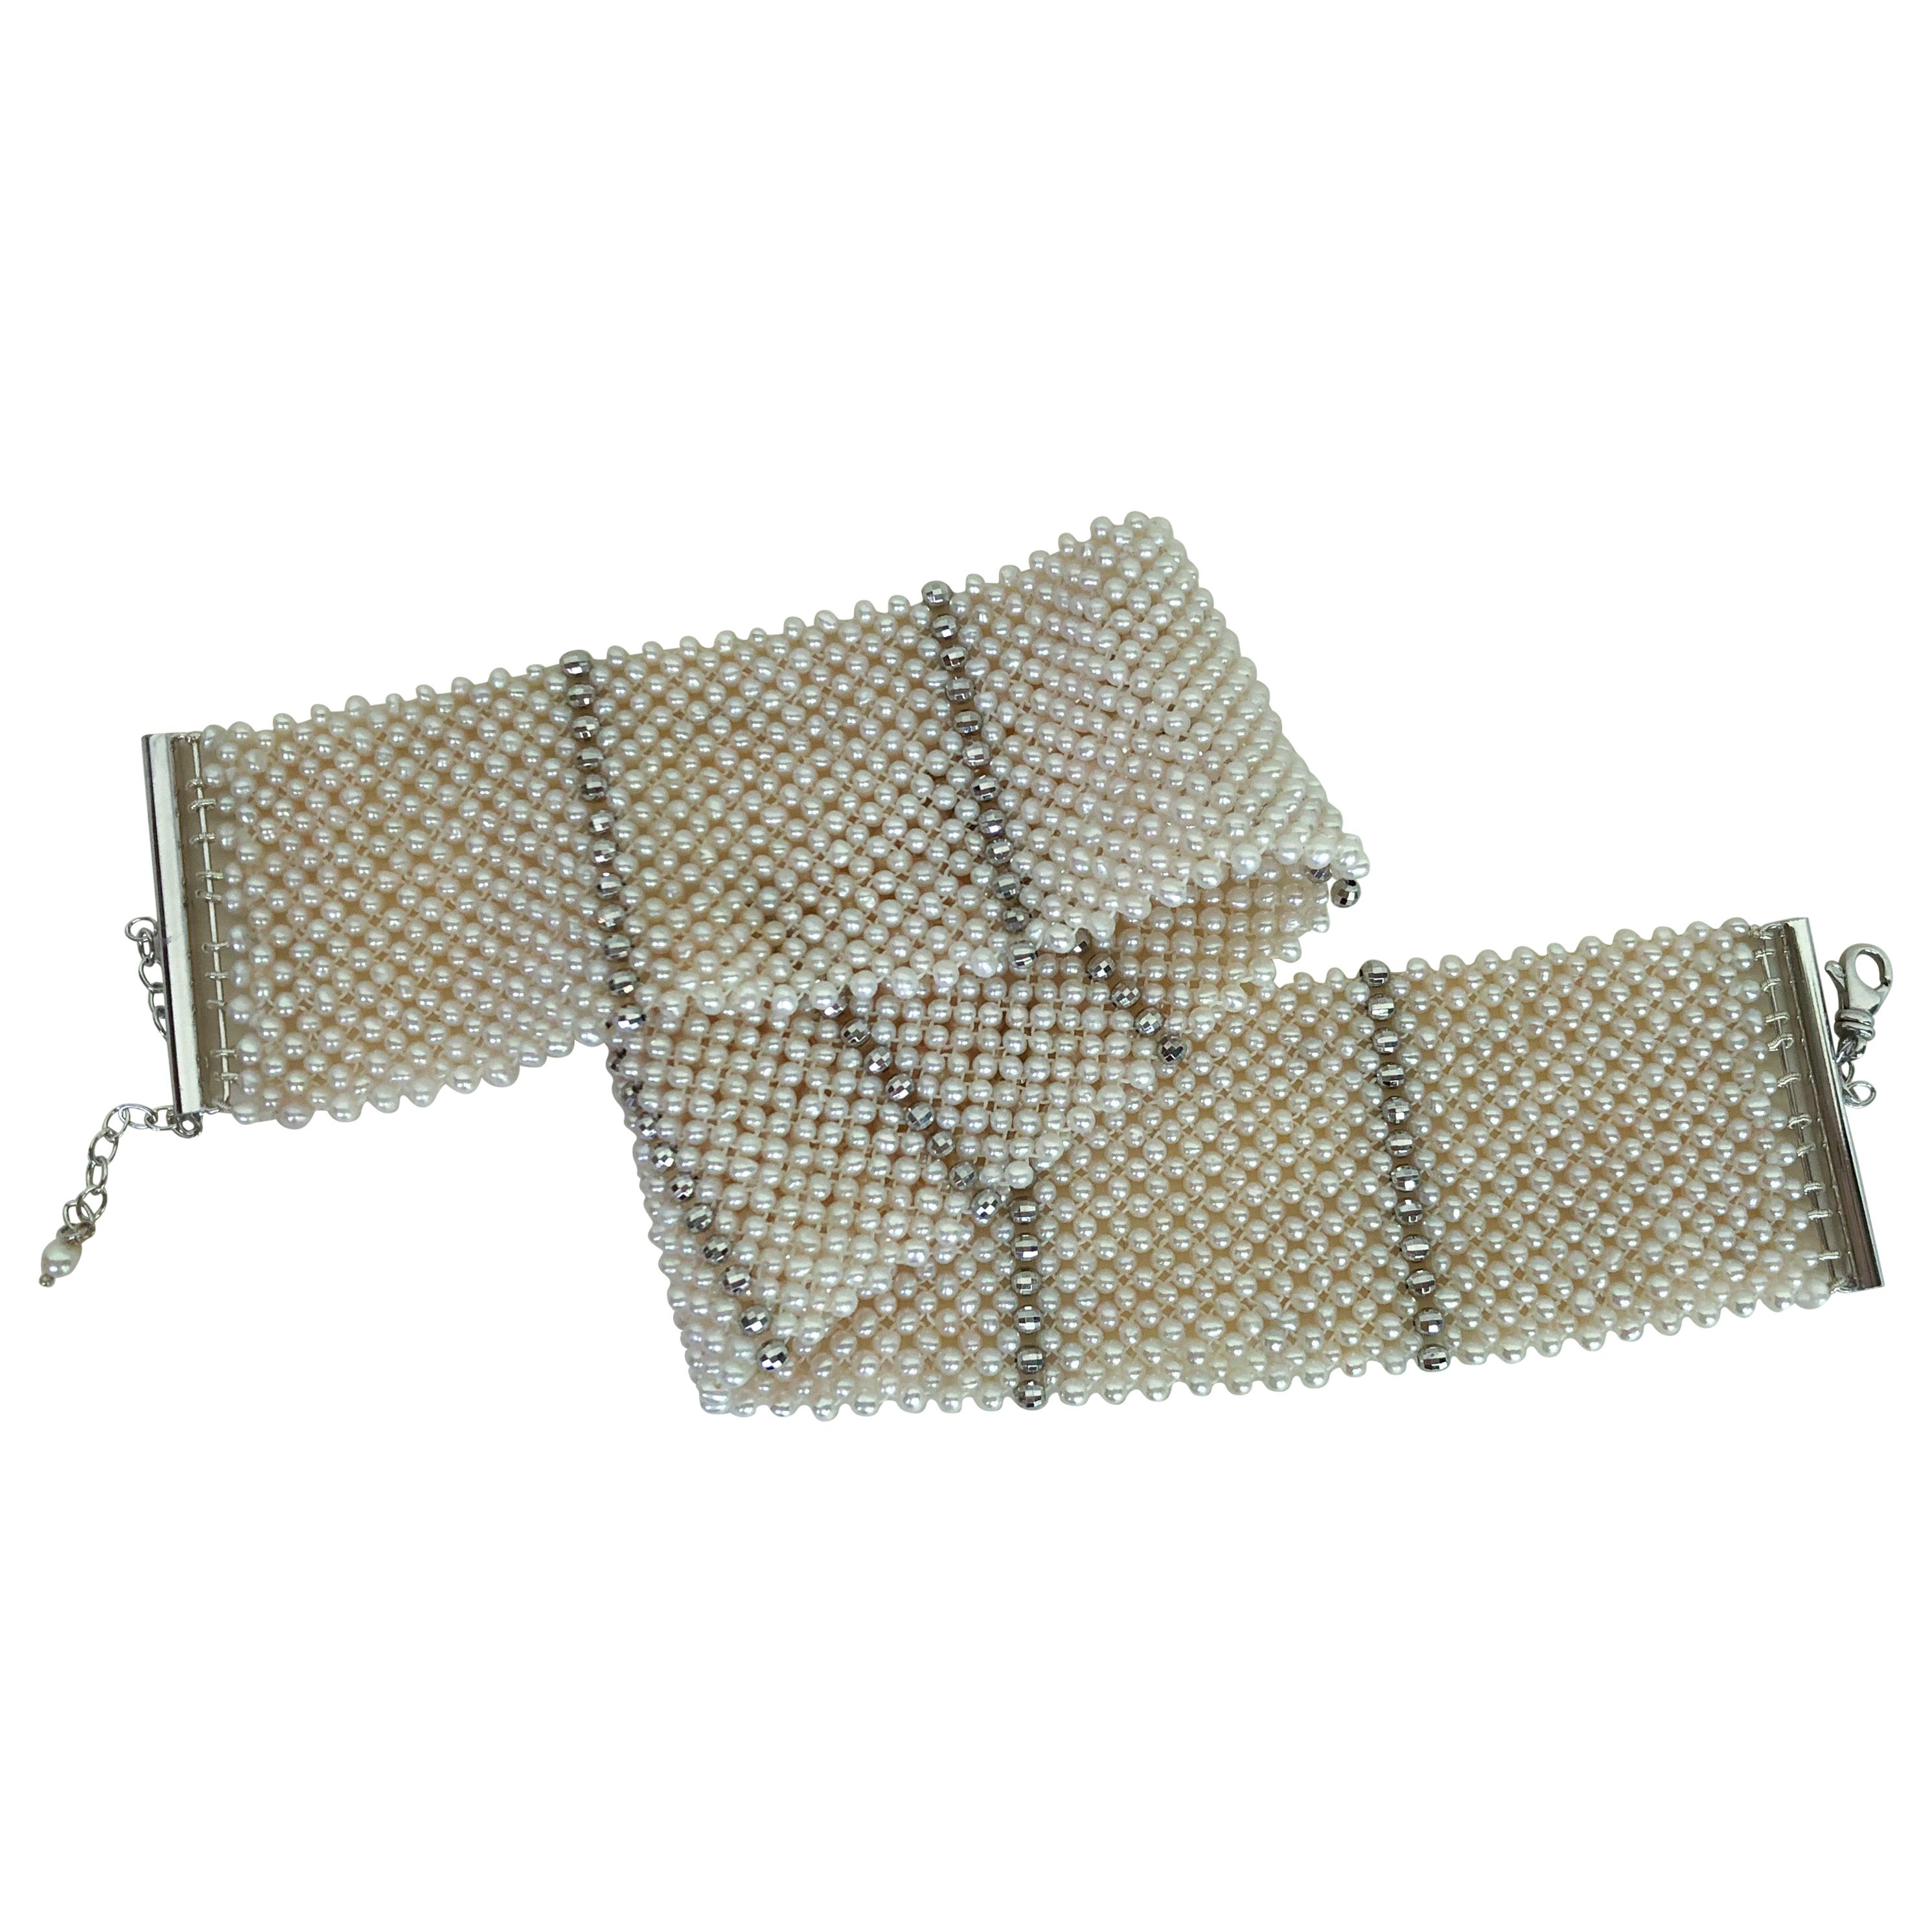 This stunning woven pearl choker with columns of silver rhodium-plated beads has a handmade silver rhodium-plated adjustable clasp, easy to put and secure once in place. The sparkling faceted silver beads glows and accents the gorgeous pearls that